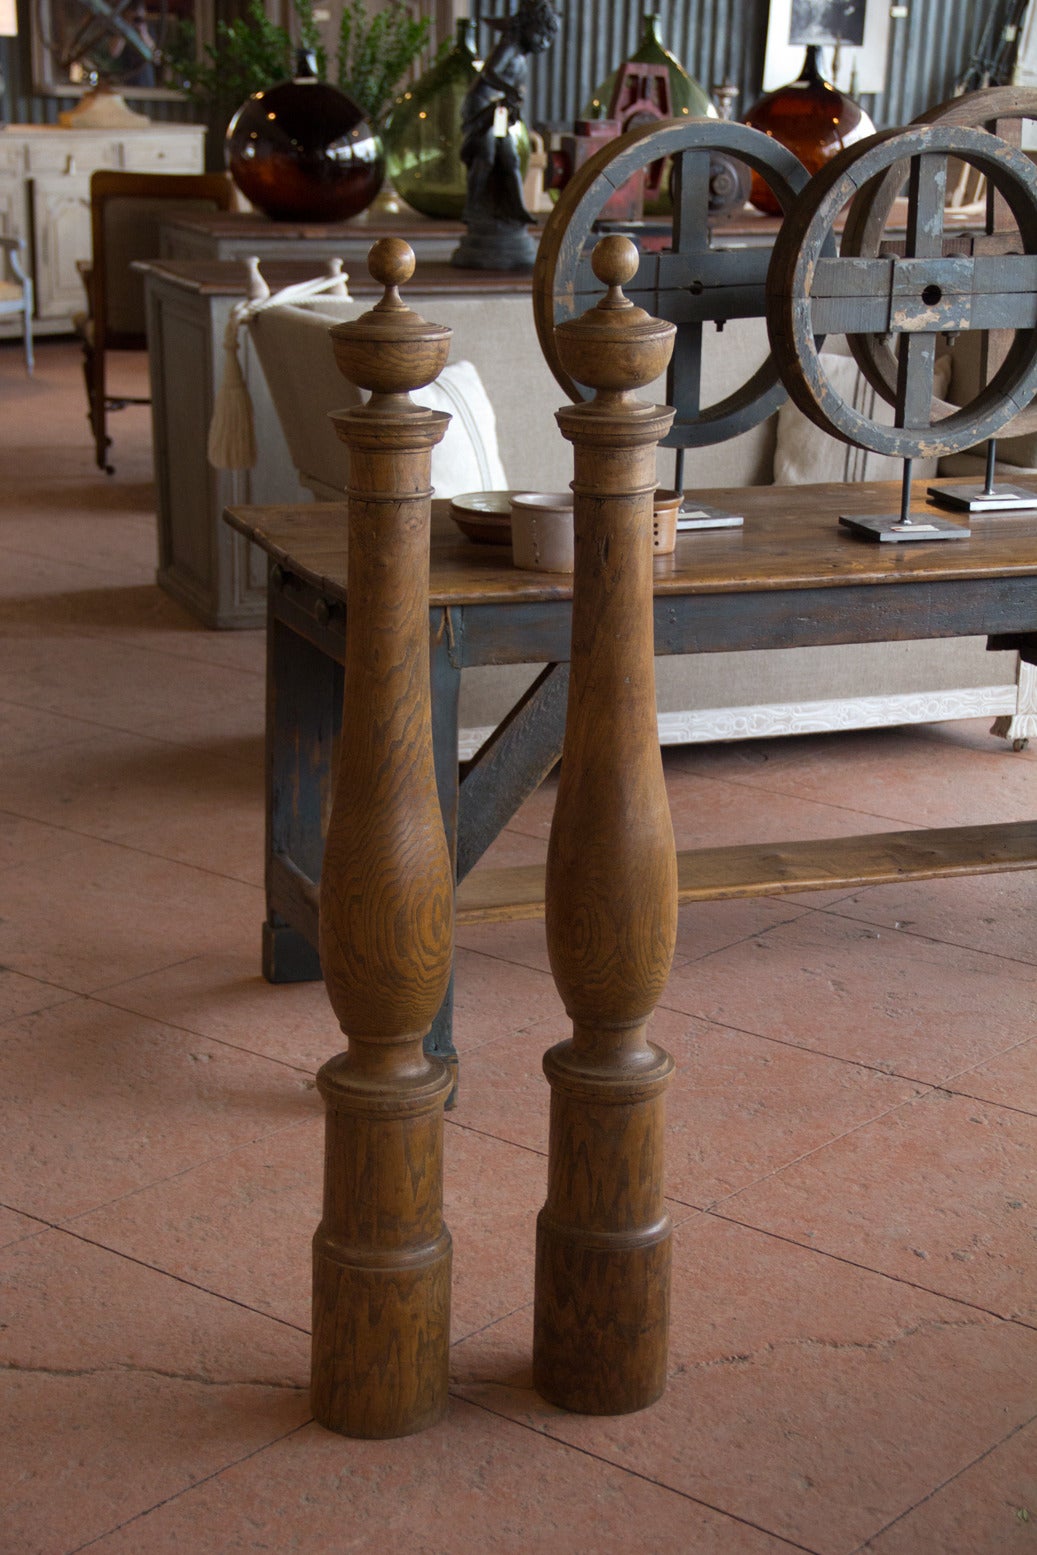 Pair of antique turned hardwood posts with ball finials.